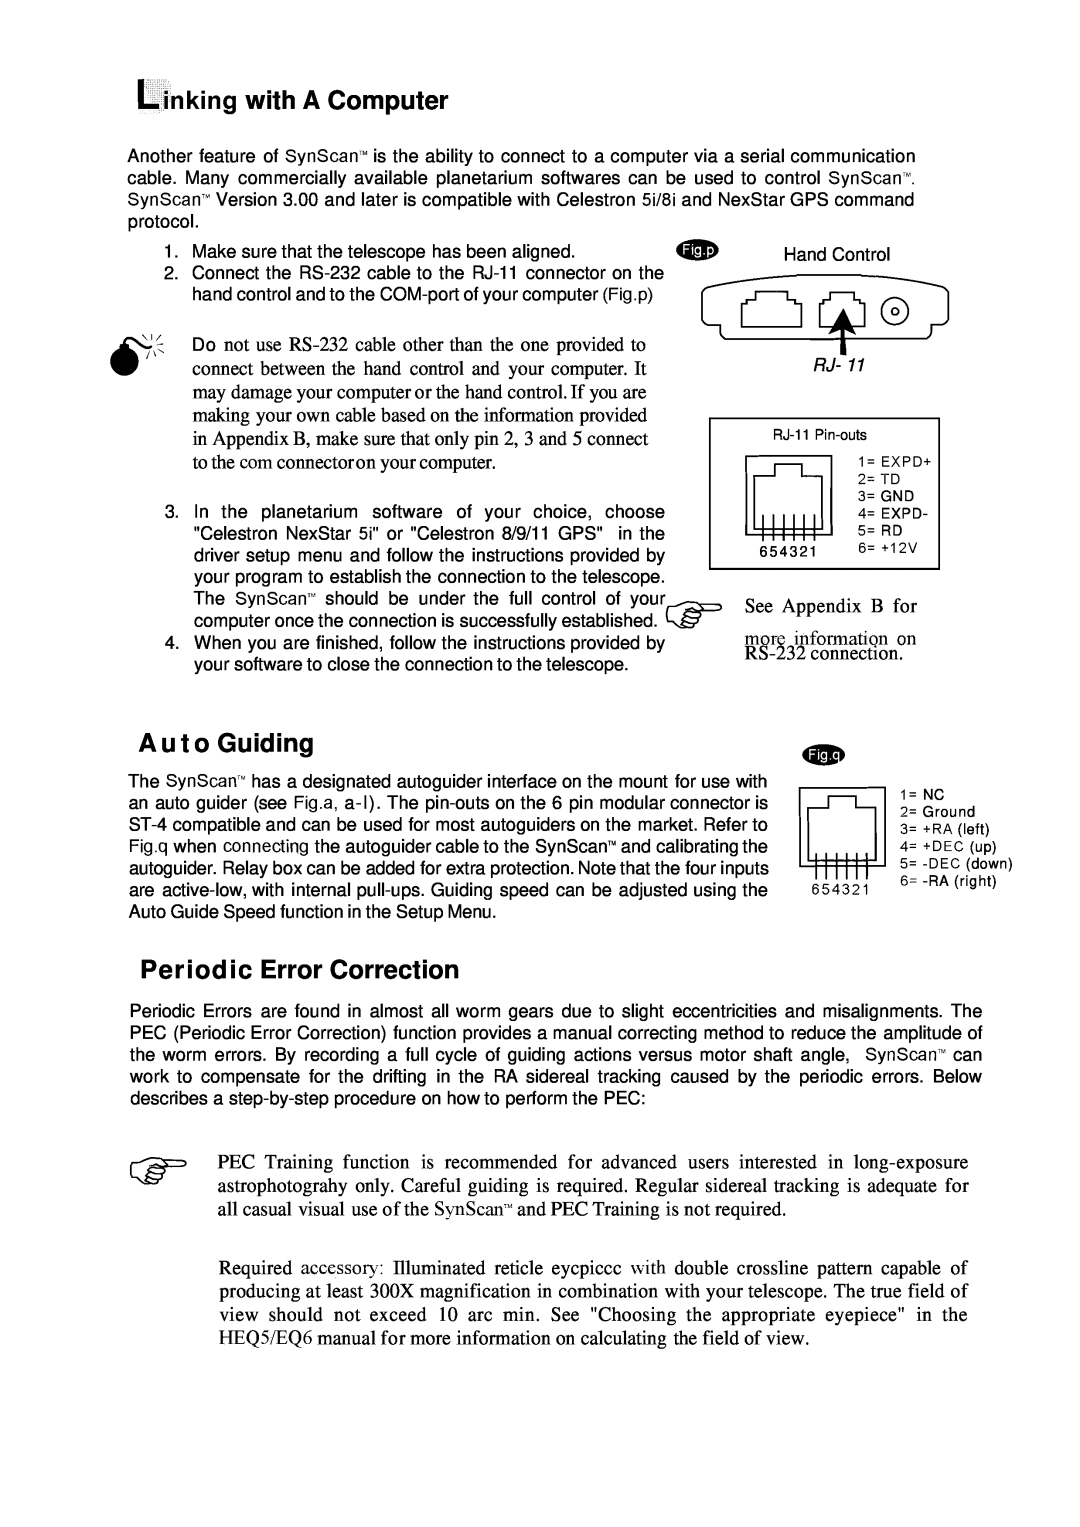 Nexstar SynScan instruction manual Linking with A Computer, A u t o Guiding, Periodic Error Correction, C b 